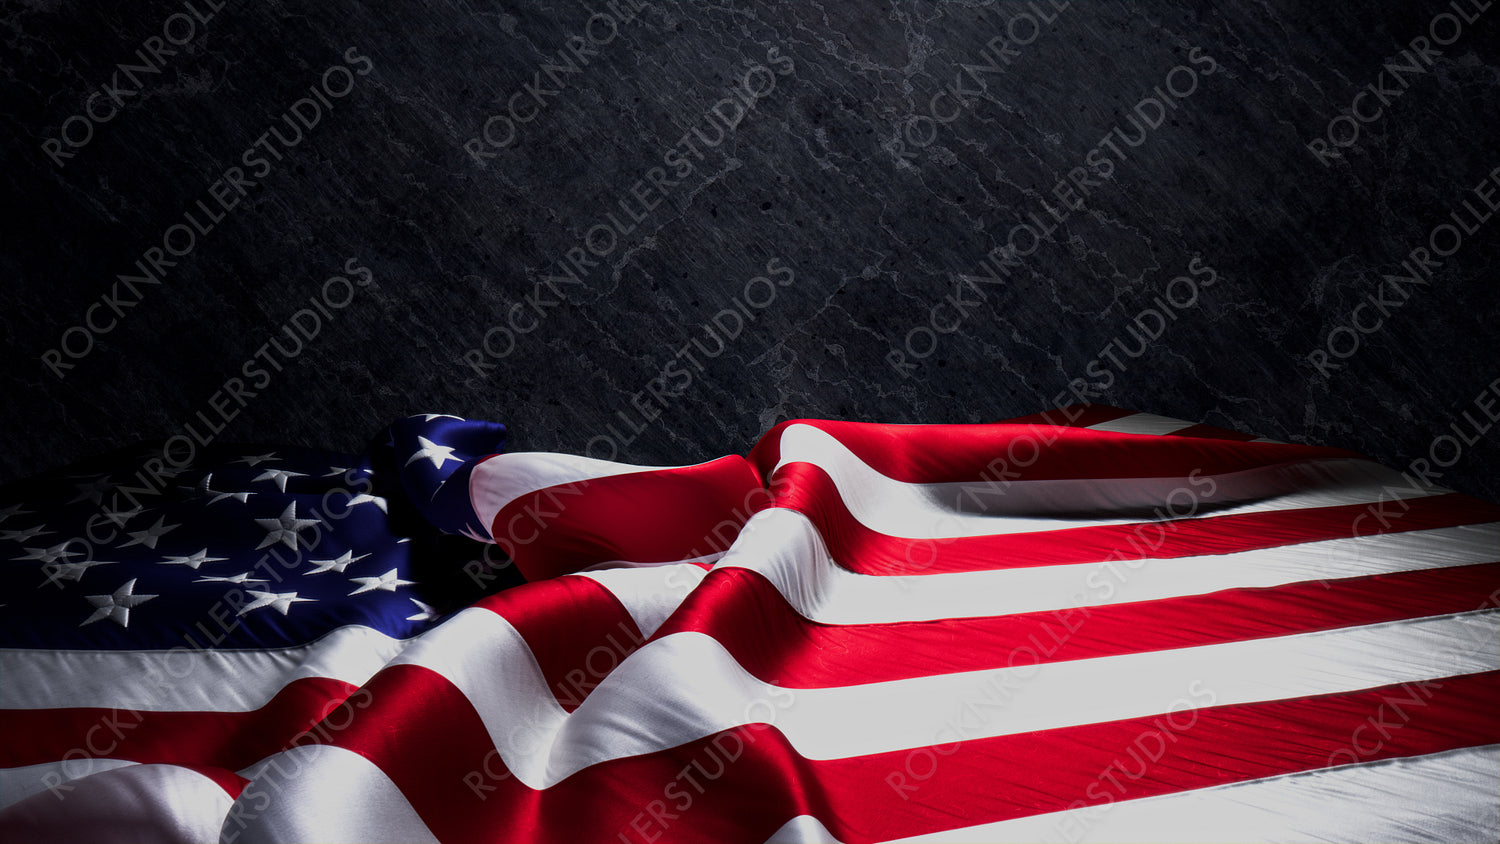 Premium Banner for Patriot Day with US Flag, Black Stone Background and Copy-Space.